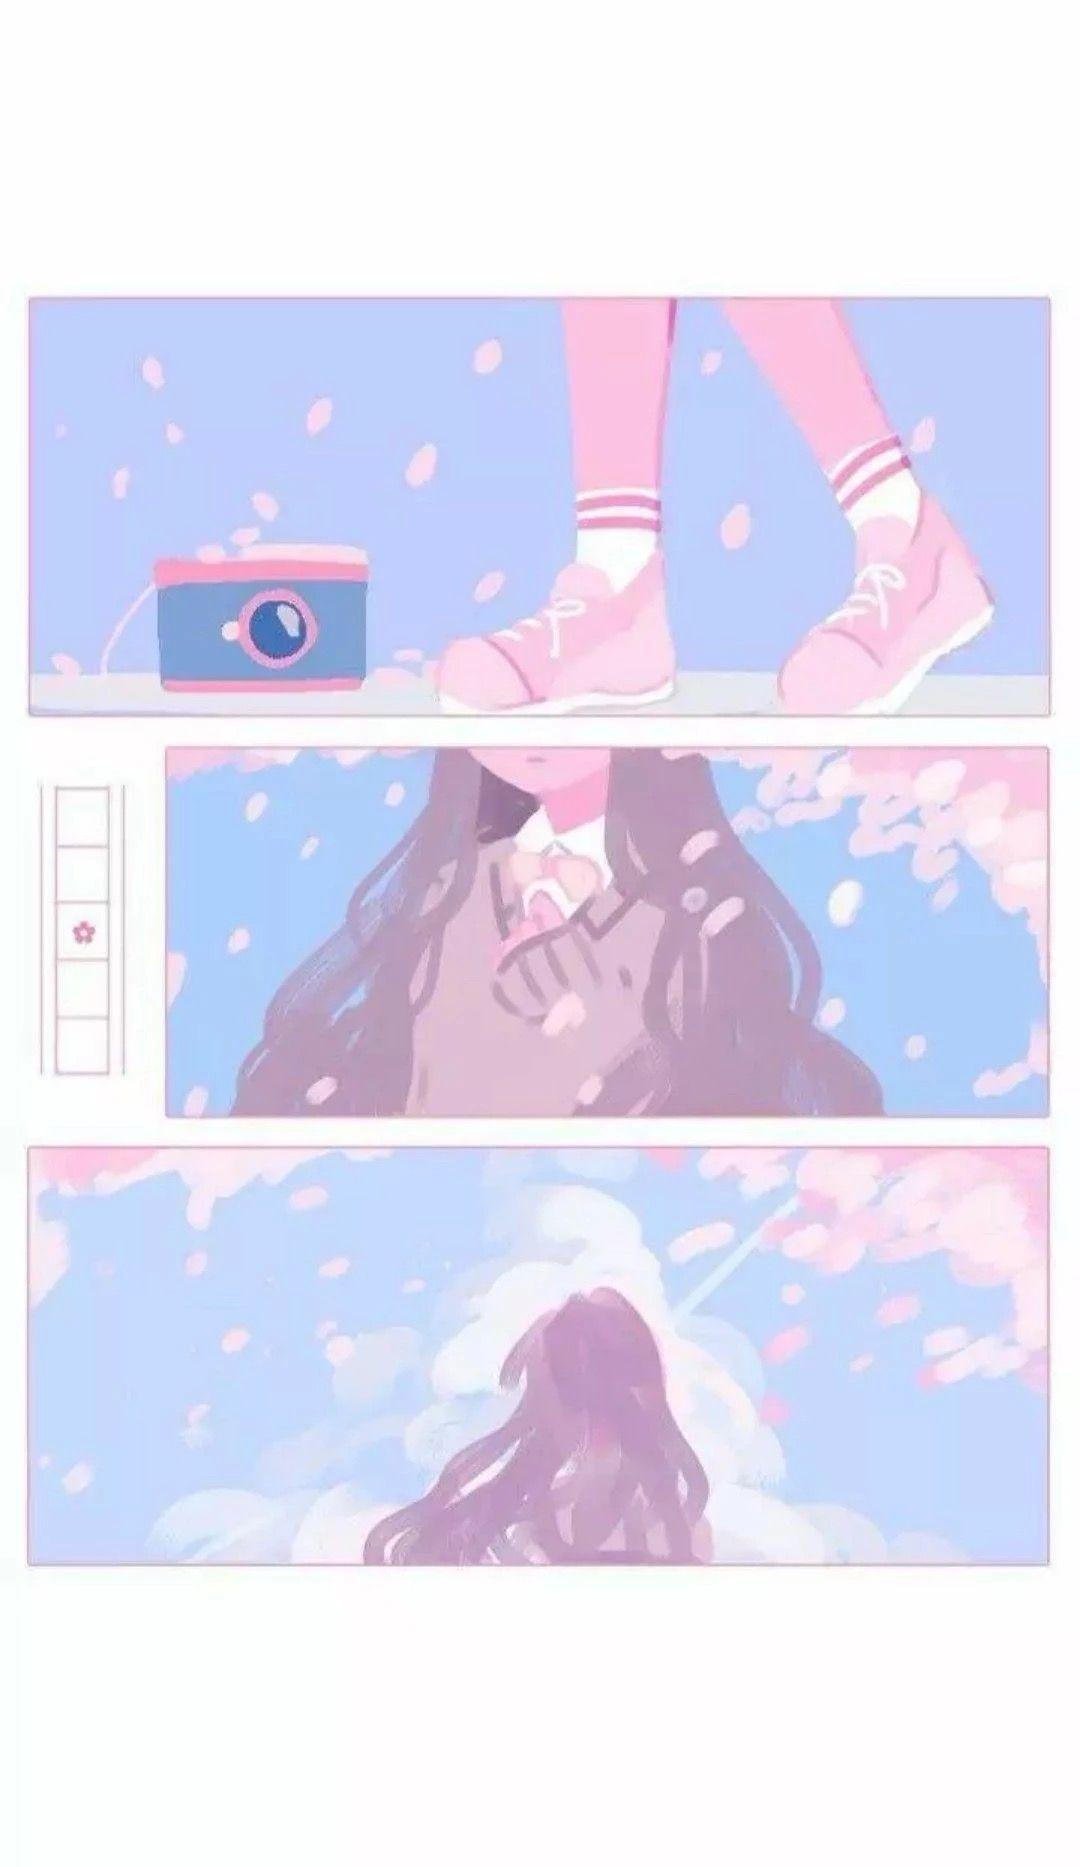 Soft Aesthetic Anime Wallpapers - Wallpaper Cave